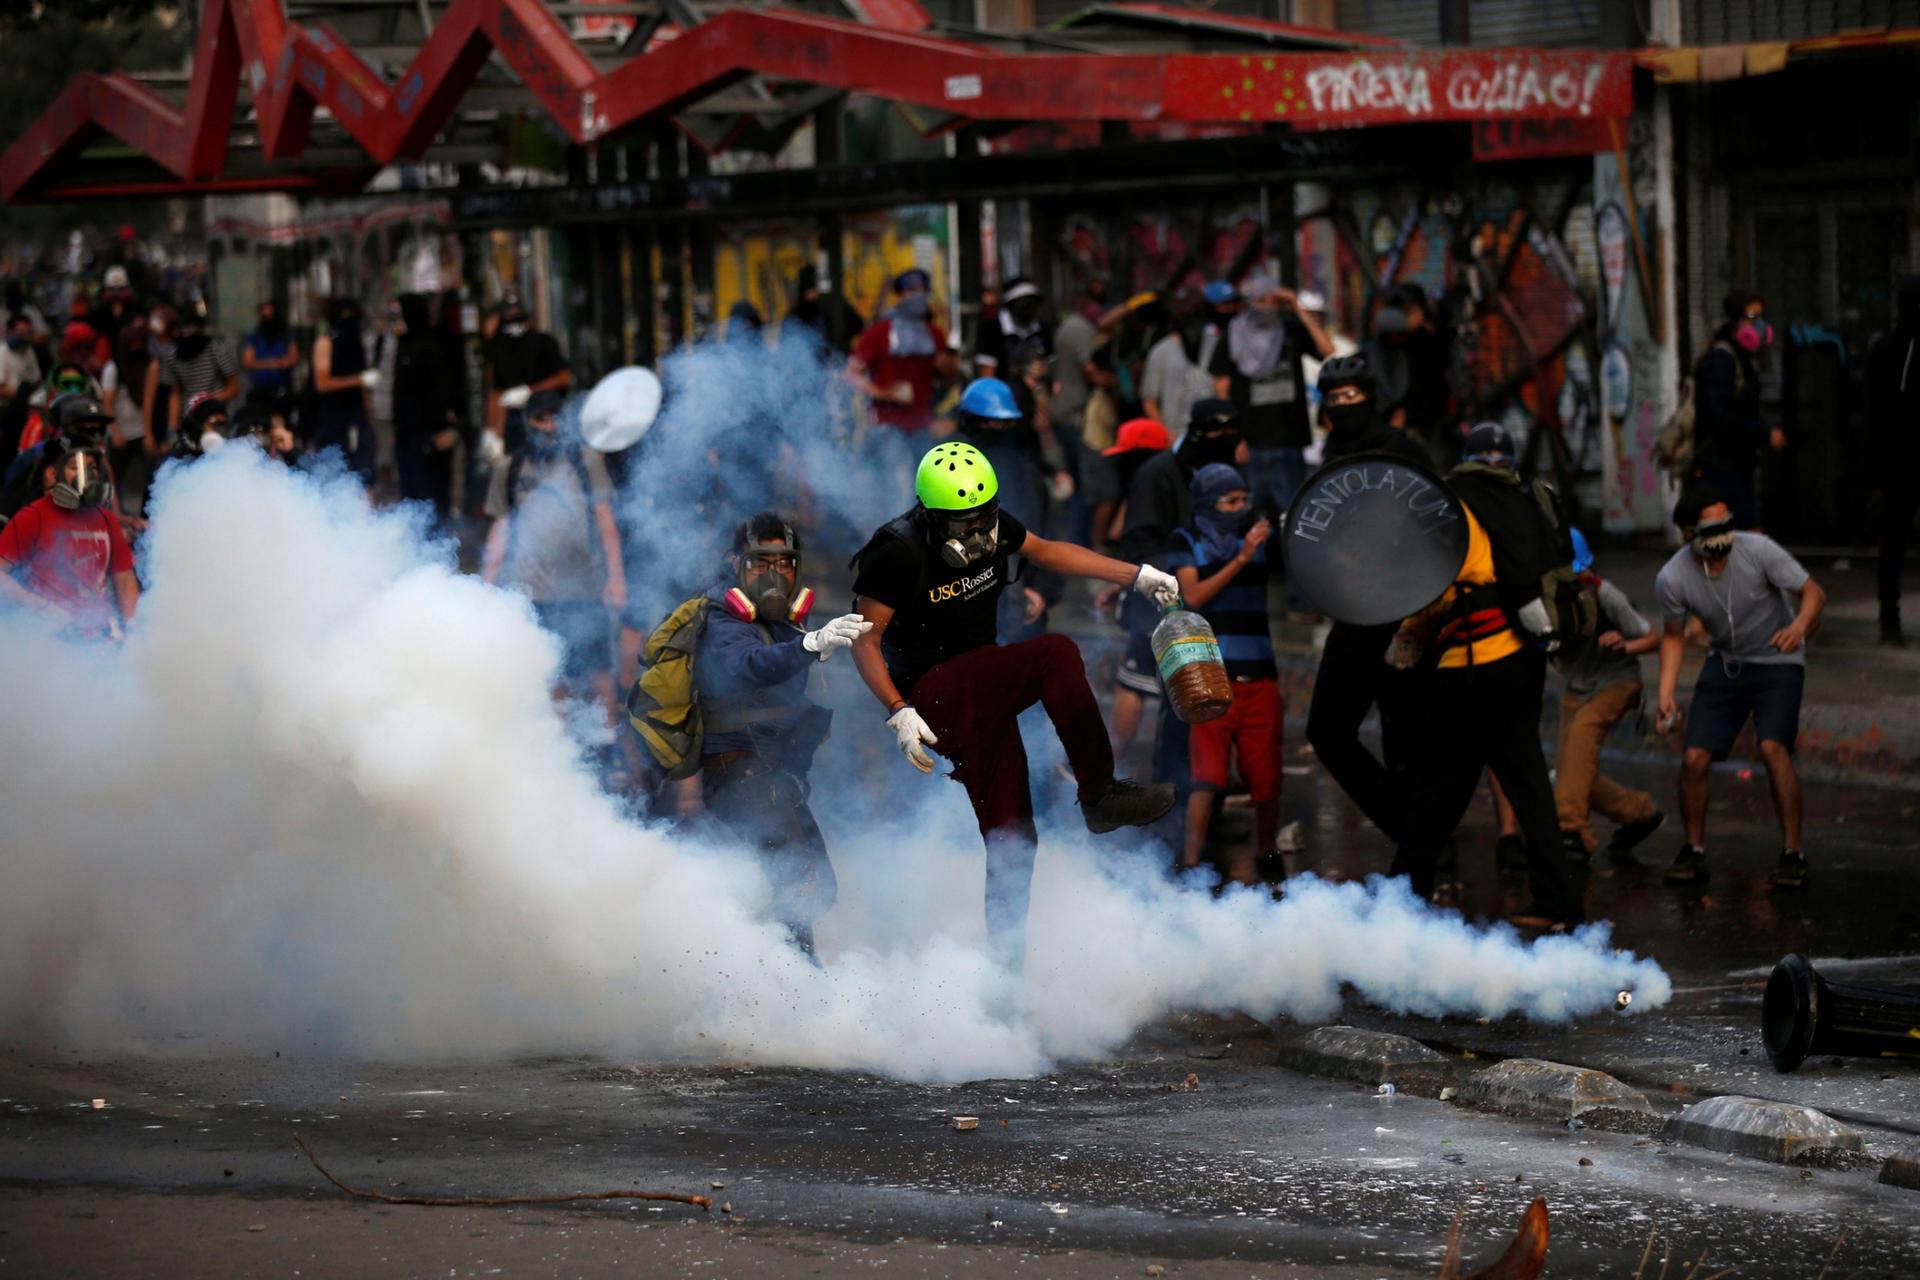 A goupr of demonstrators wearing gas masks are show surrounded by clouds of tear gas.